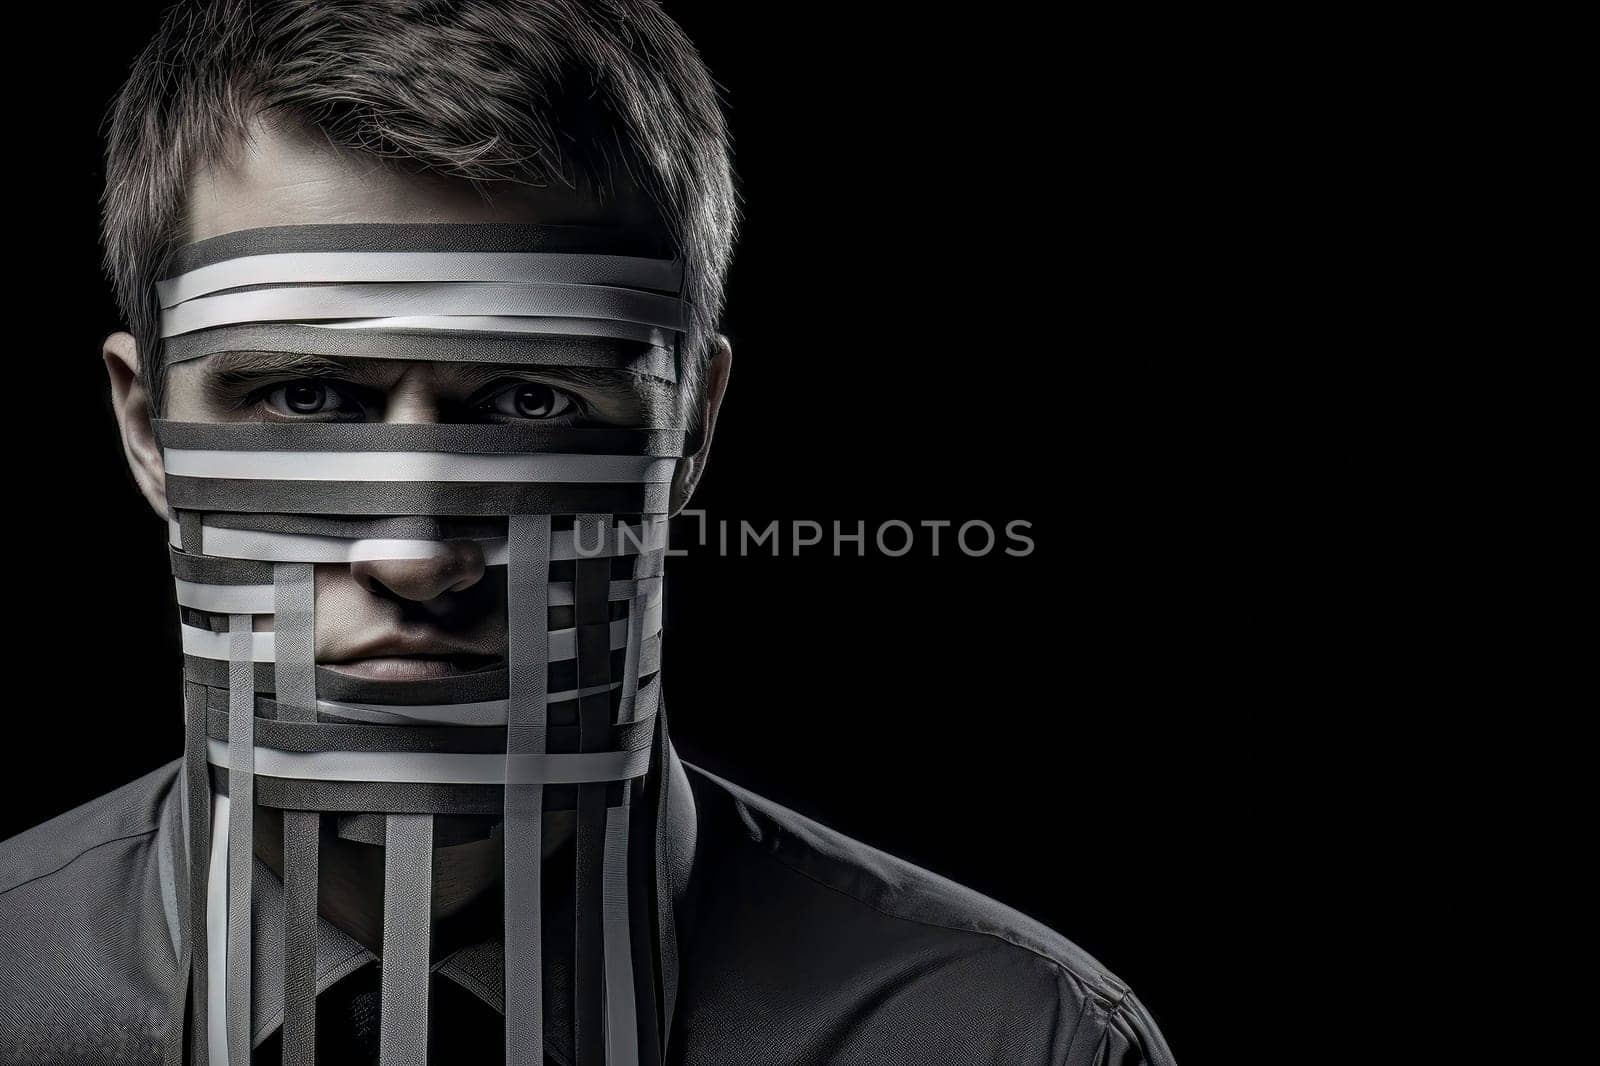 Provocative image of a gagged man, illustrating the oppressive effects of censorship and silenced voices